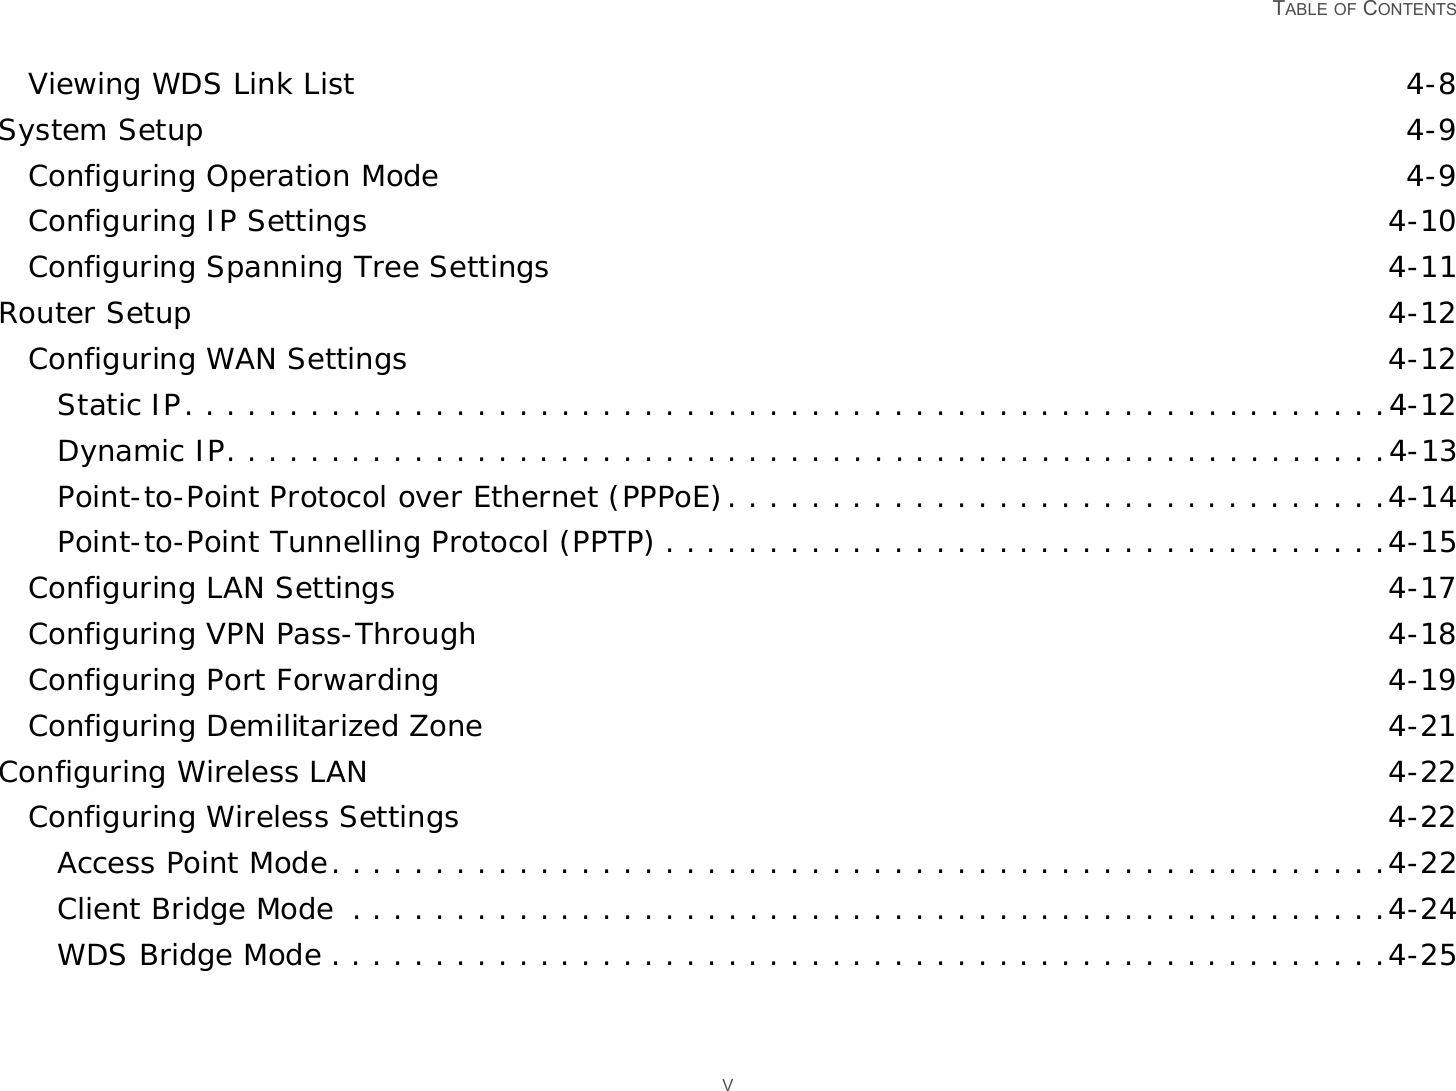   TABLE OF CONTENTS VViewing WDS Link List 4-8System Setup 4-9Configuring Operation Mode 4-9Configuring IP Settings 4-10Configuring Spanning Tree Settings 4-11Router Setup 4-12Configuring WAN Settings 4-12Static IP. . . . . . . . . . . . . . . . . . . . . . . . . . . . . . . . . . . . . . . . . . . . . . . . . . . . . . . . . .4-12Dynamic IP. . . . . . . . . . . . . . . . . . . . . . . . . . . . . . . . . . . . . . . . . . . . . . . . . . . . . . . .4-13Point-to-Point Protocol over Ethernet (PPPoE). . . . . . . . . . . . . . . . . . . . . . . . . . . . . . . .4-14Point-to-Point Tunnelling Protocol (PPTP) . . . . . . . . . . . . . . . . . . . . . . . . . . . . . . . . . . .4-15Configuring LAN Settings 4-17Configuring VPN Pass-Through 4-18Configuring Port Forwarding 4-19Configuring Demilitarized Zone 4-21Configuring Wireless LAN 4-22Configuring Wireless Settings 4-22Access Point Mode. . . . . . . . . . . . . . . . . . . . . . . . . . . . . . . . . . . . . . . . . . . . . . . . . . .4-22Client Bridge Mode  . . . . . . . . . . . . . . . . . . . . . . . . . . . . . . . . . . . . . . . . . . . . . . . . . .4-24WDS Bridge Mode . . . . . . . . . . . . . . . . . . . . . . . . . . . . . . . . . . . . . . . . . . . . . . . . . . .4-25